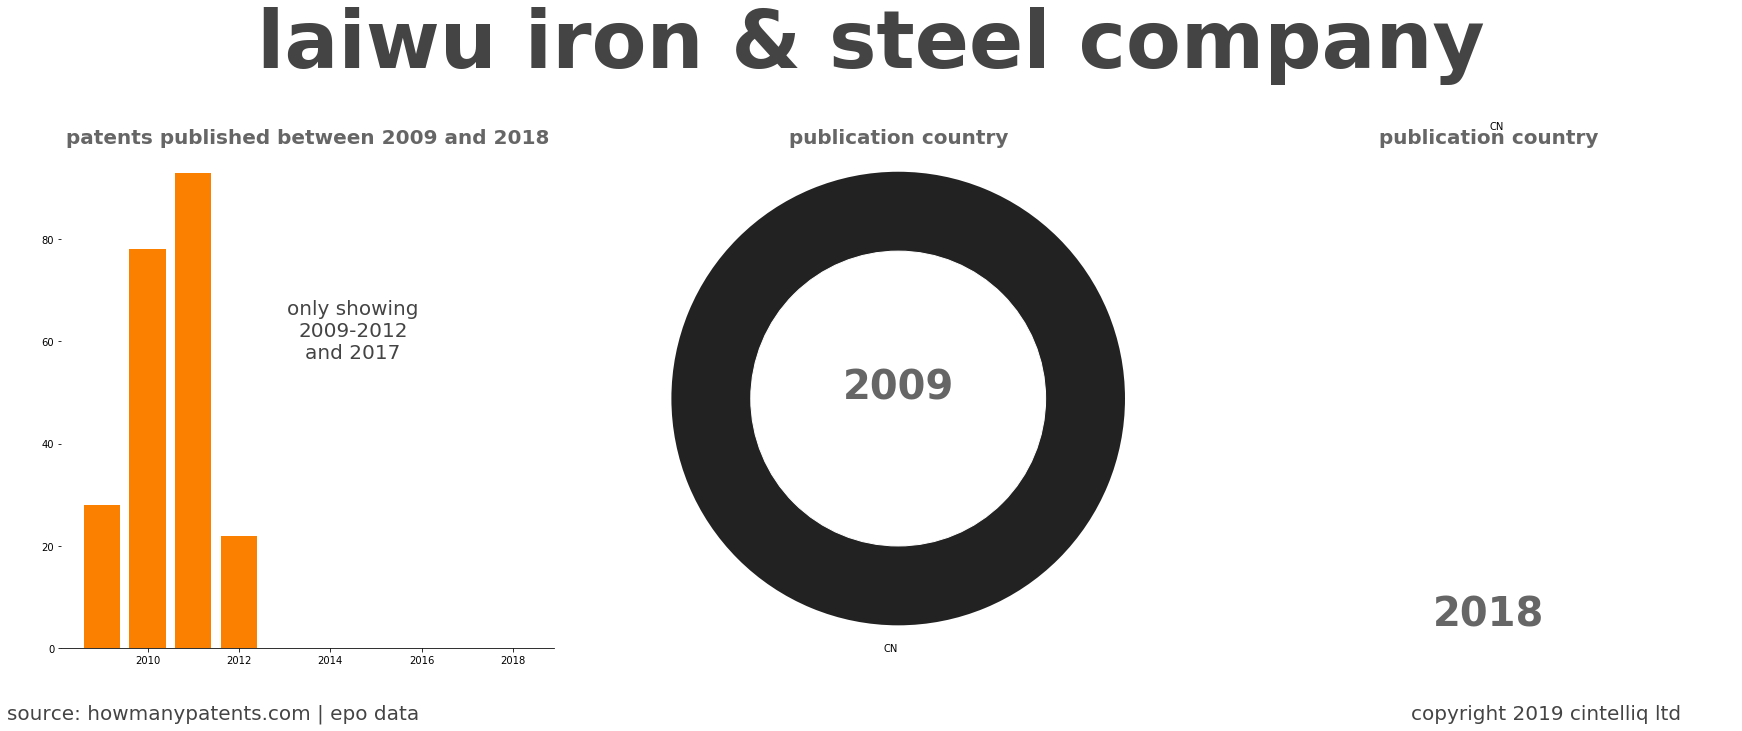 summary of patents for Laiwu Iron & Steel Company